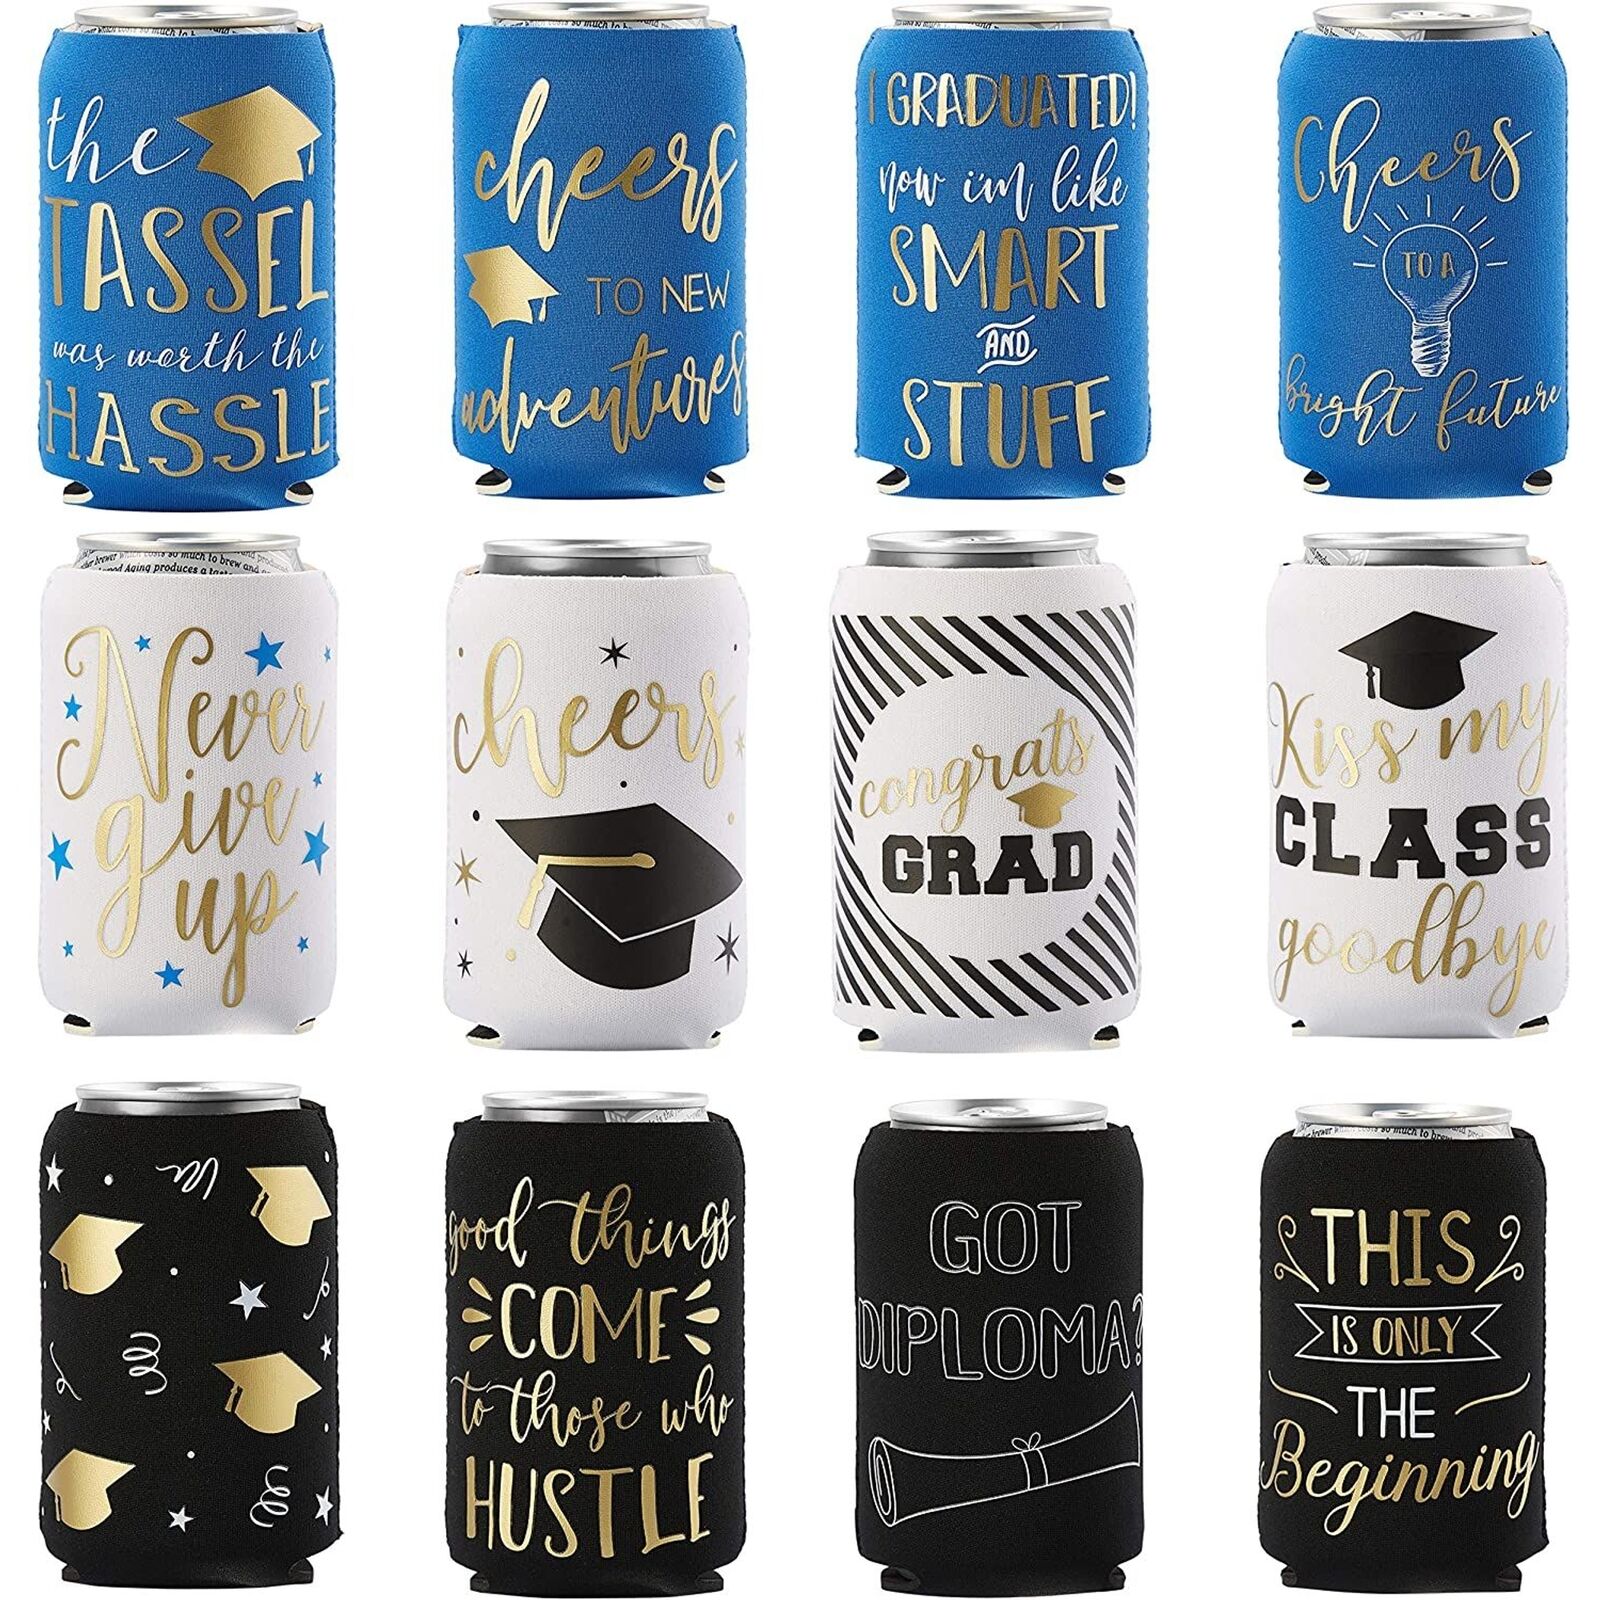 12x Graduation Beer and Soda Can Sleeves Fun Grad Party Favors Gifts Fits 12 oz